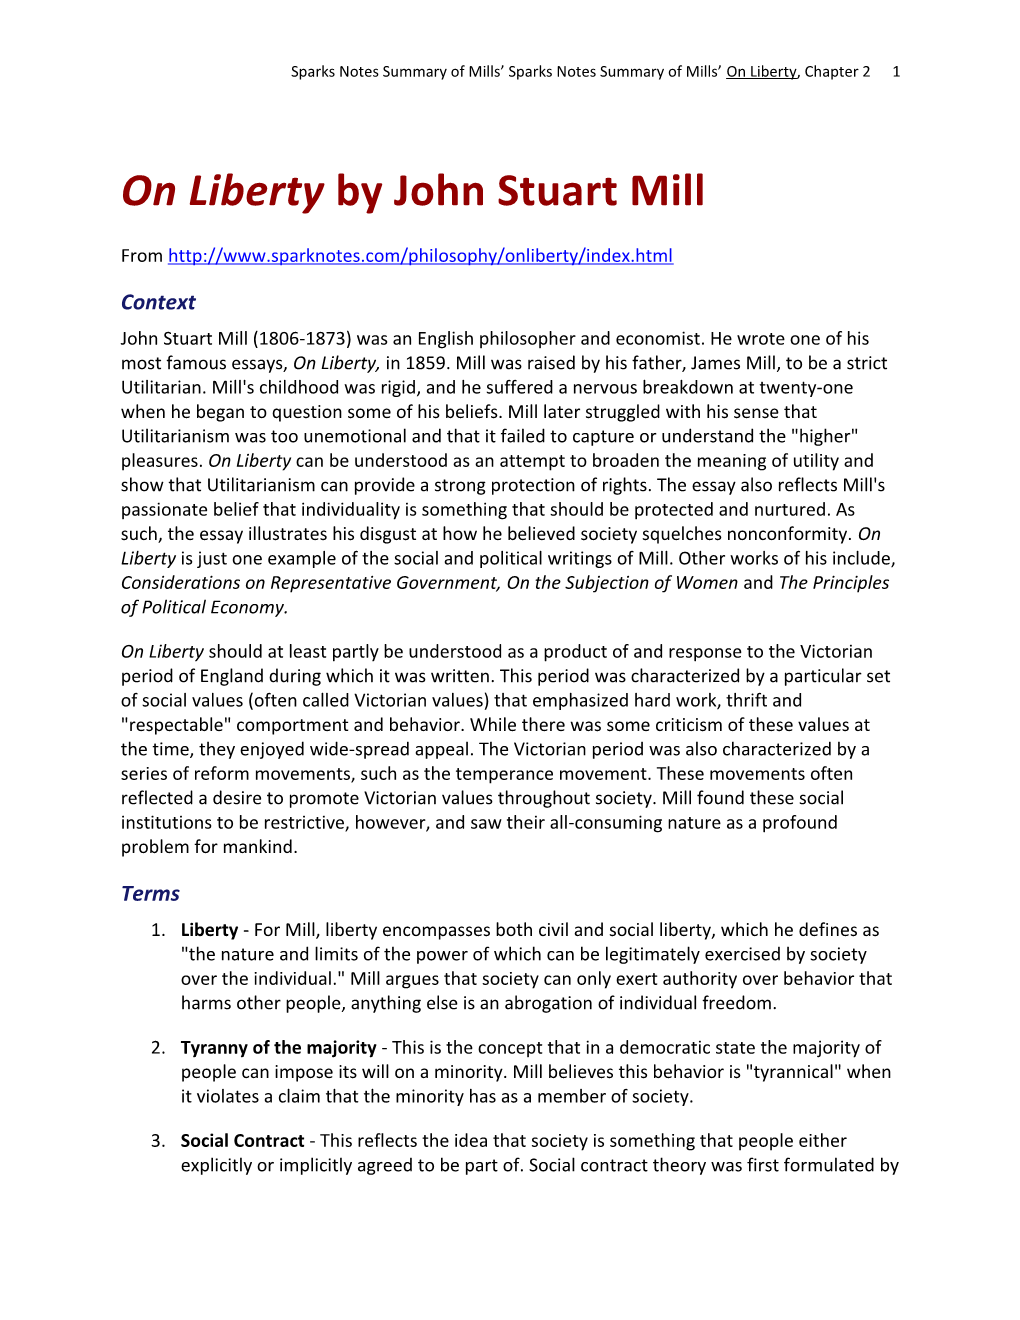 ENG 1213: Unit 3 on Liberty, Chapter 2